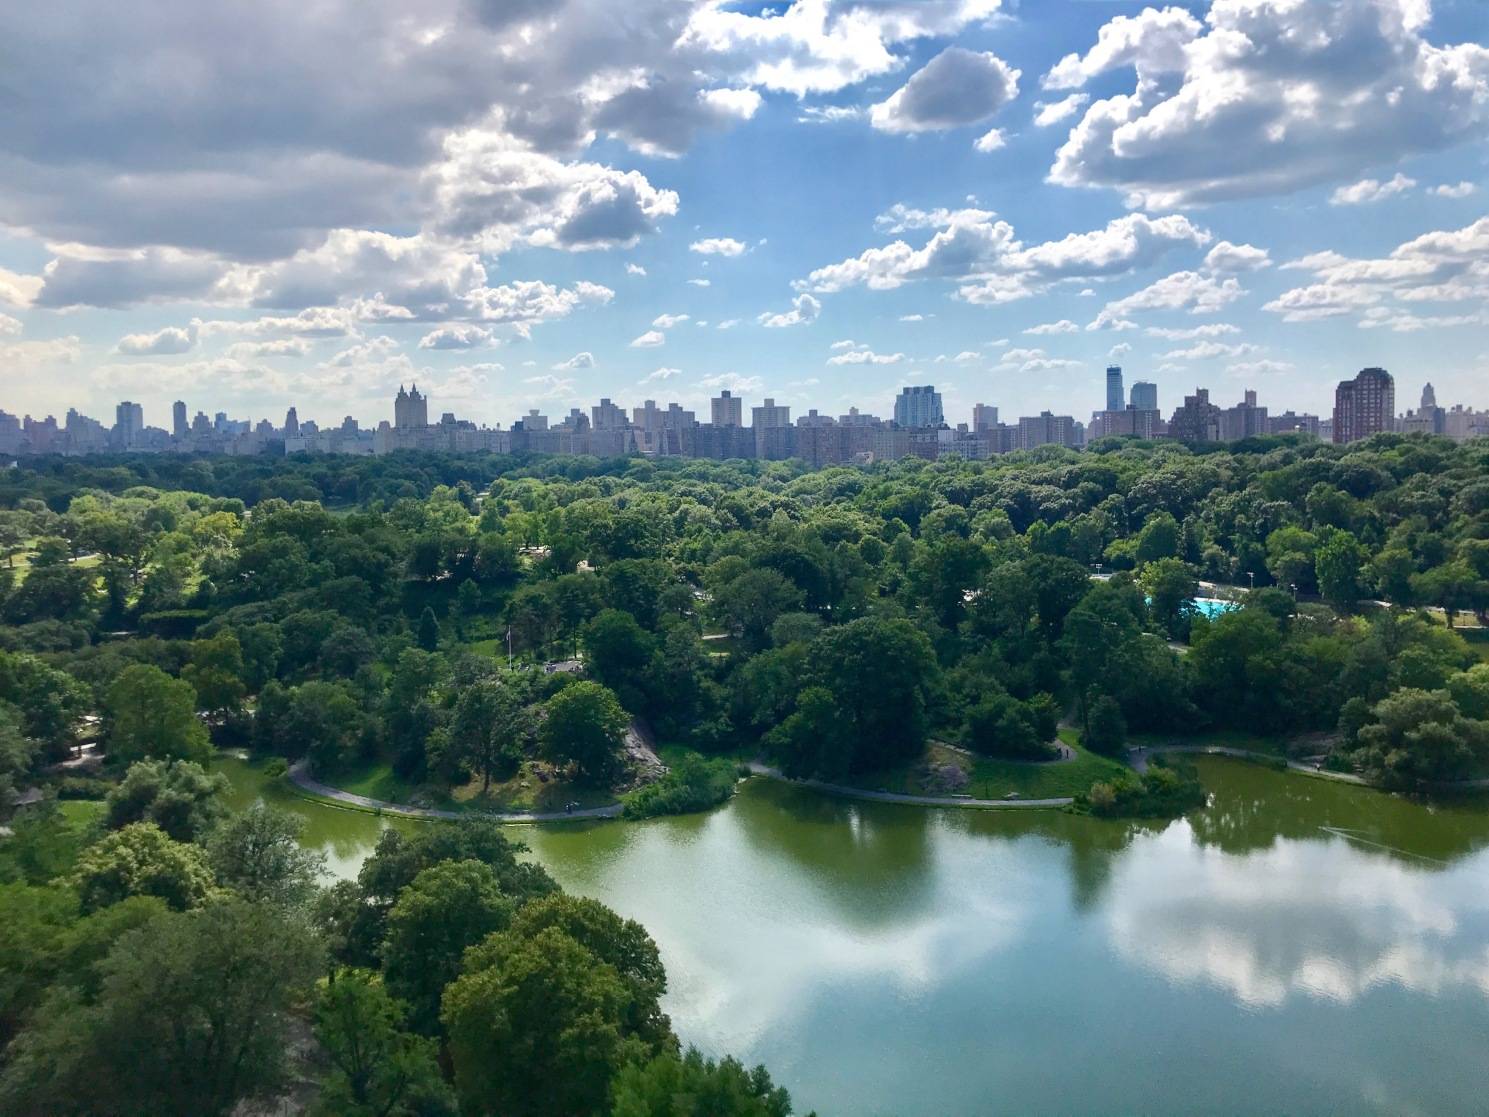 BREATHTAKING VIEWS FROM THE TOP OF CENTRAL PARK.